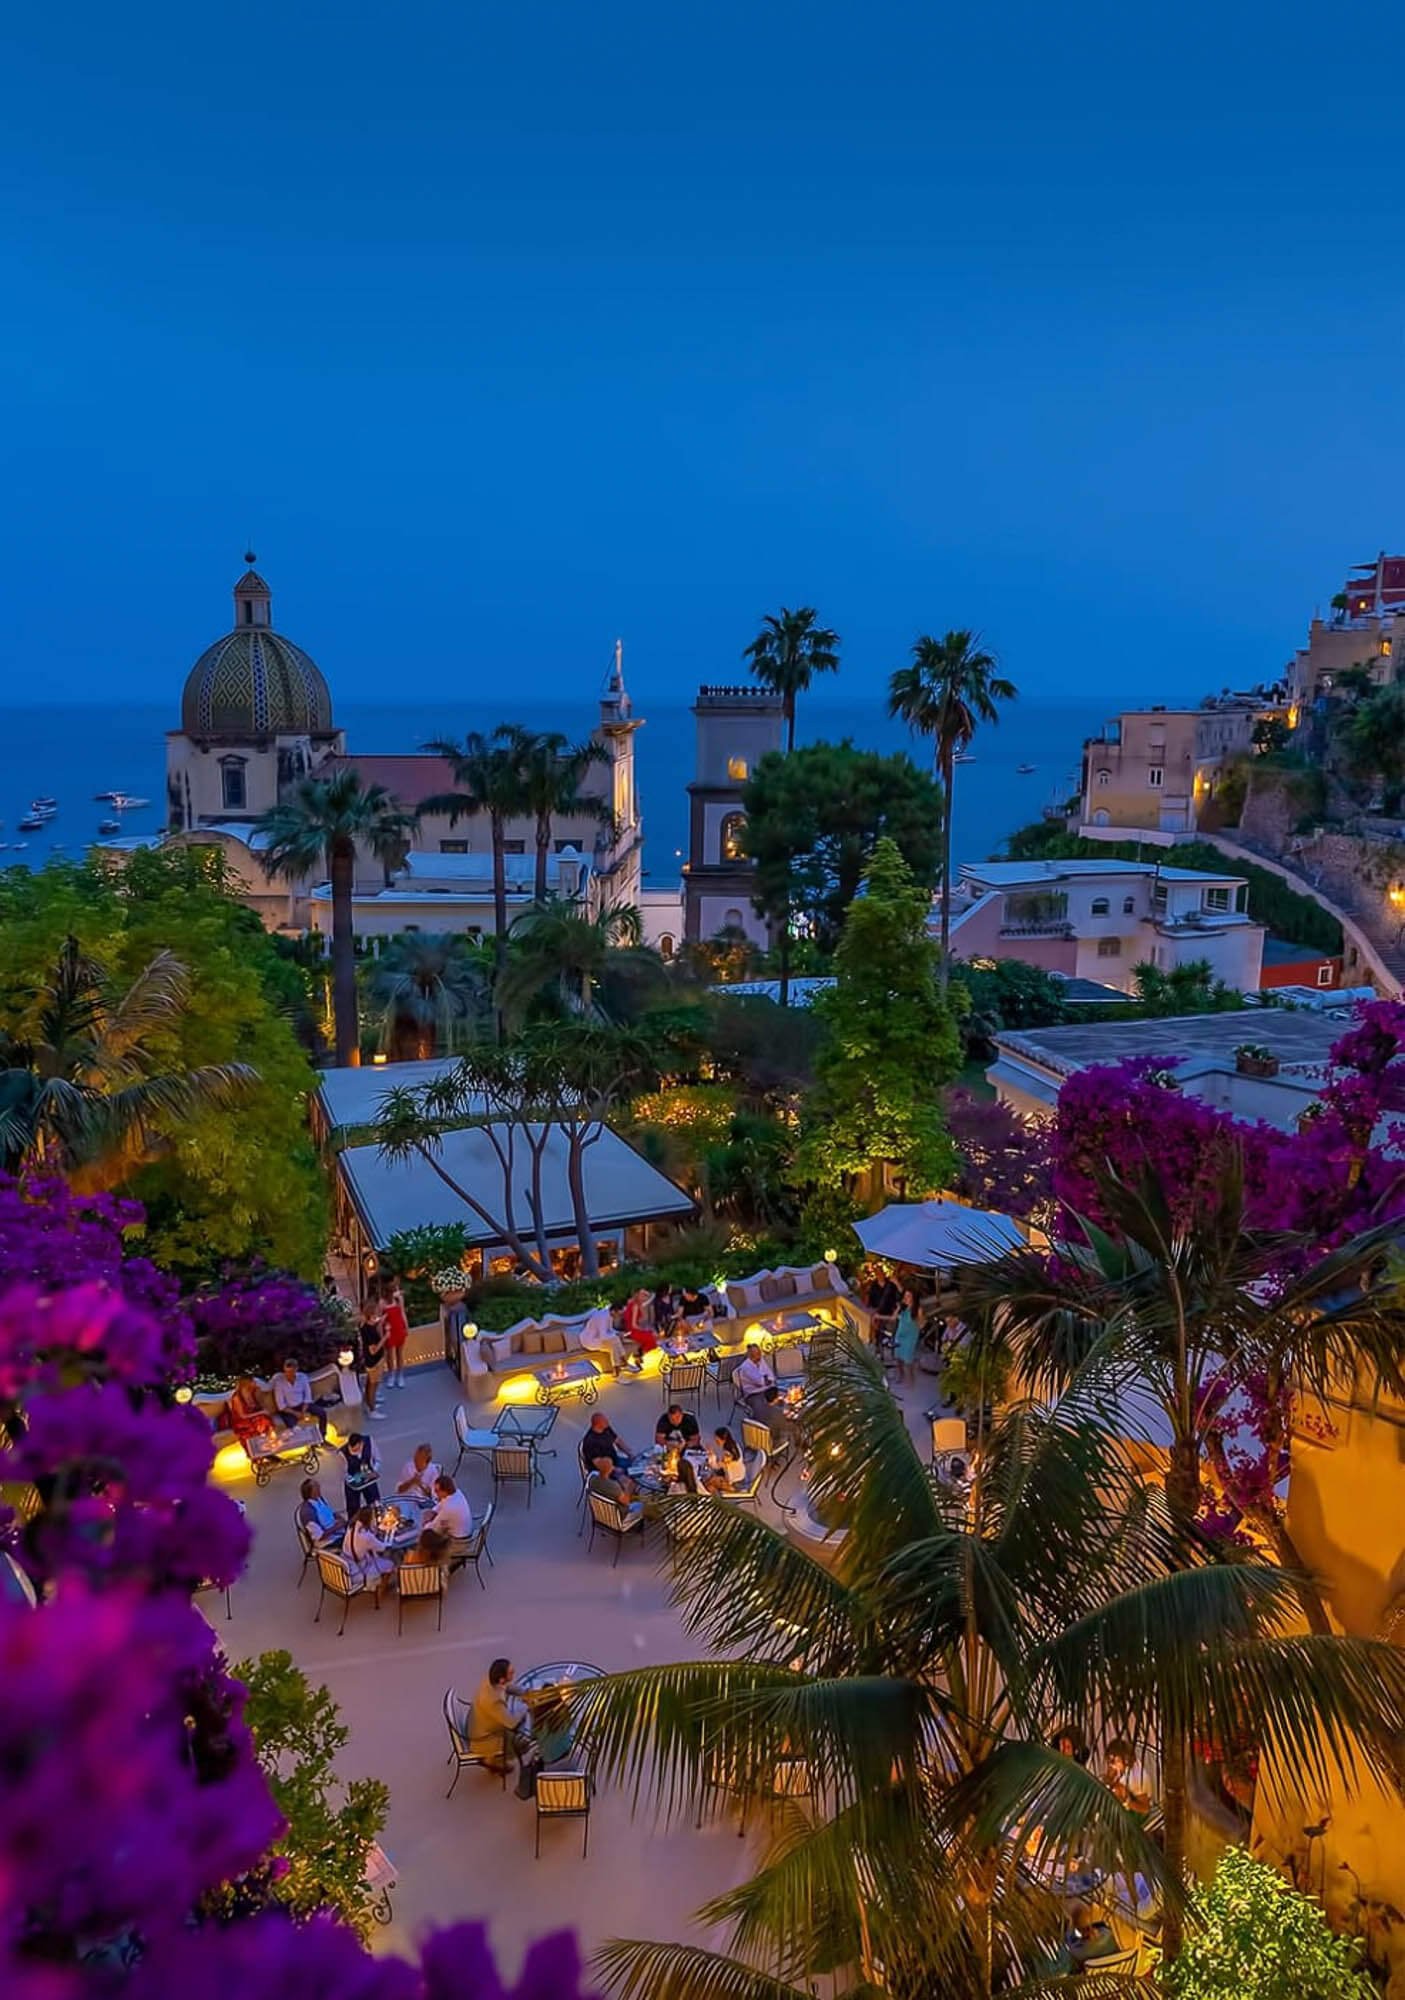 Le Petit Murat is a popular Positano restaurant and bar inside the stunning Hotel Palazza Murat, a 4 star hotel right in the center of Positano.